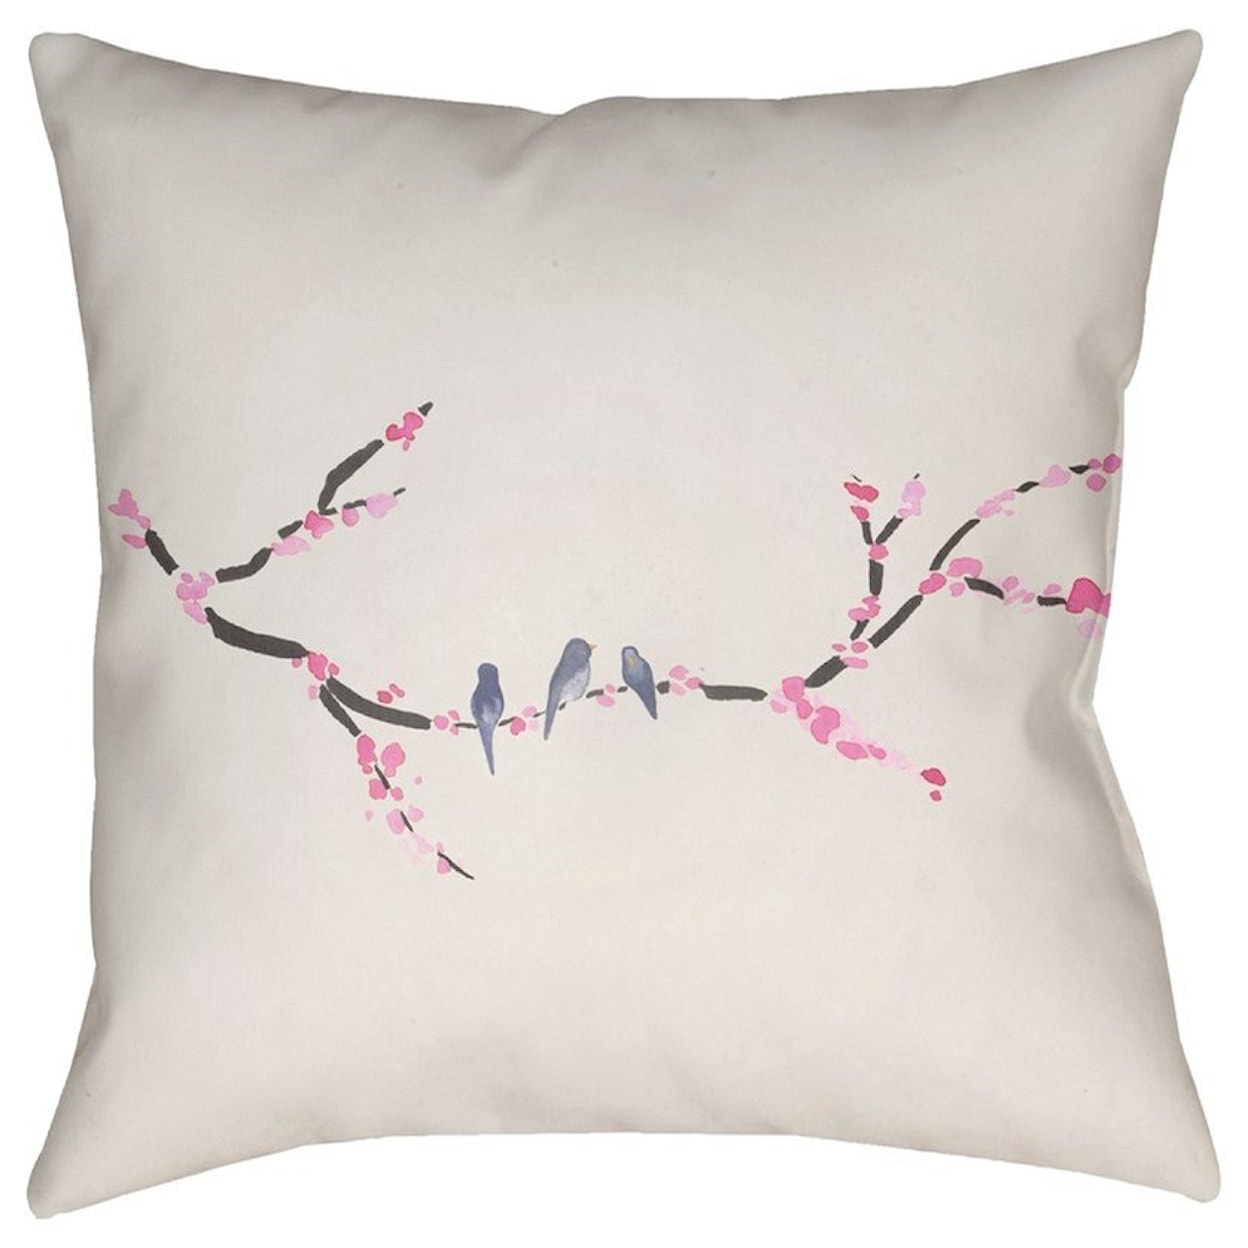 Surya Cherry Blossoms 18 x 18 x 4 Polyester Throw Pillow